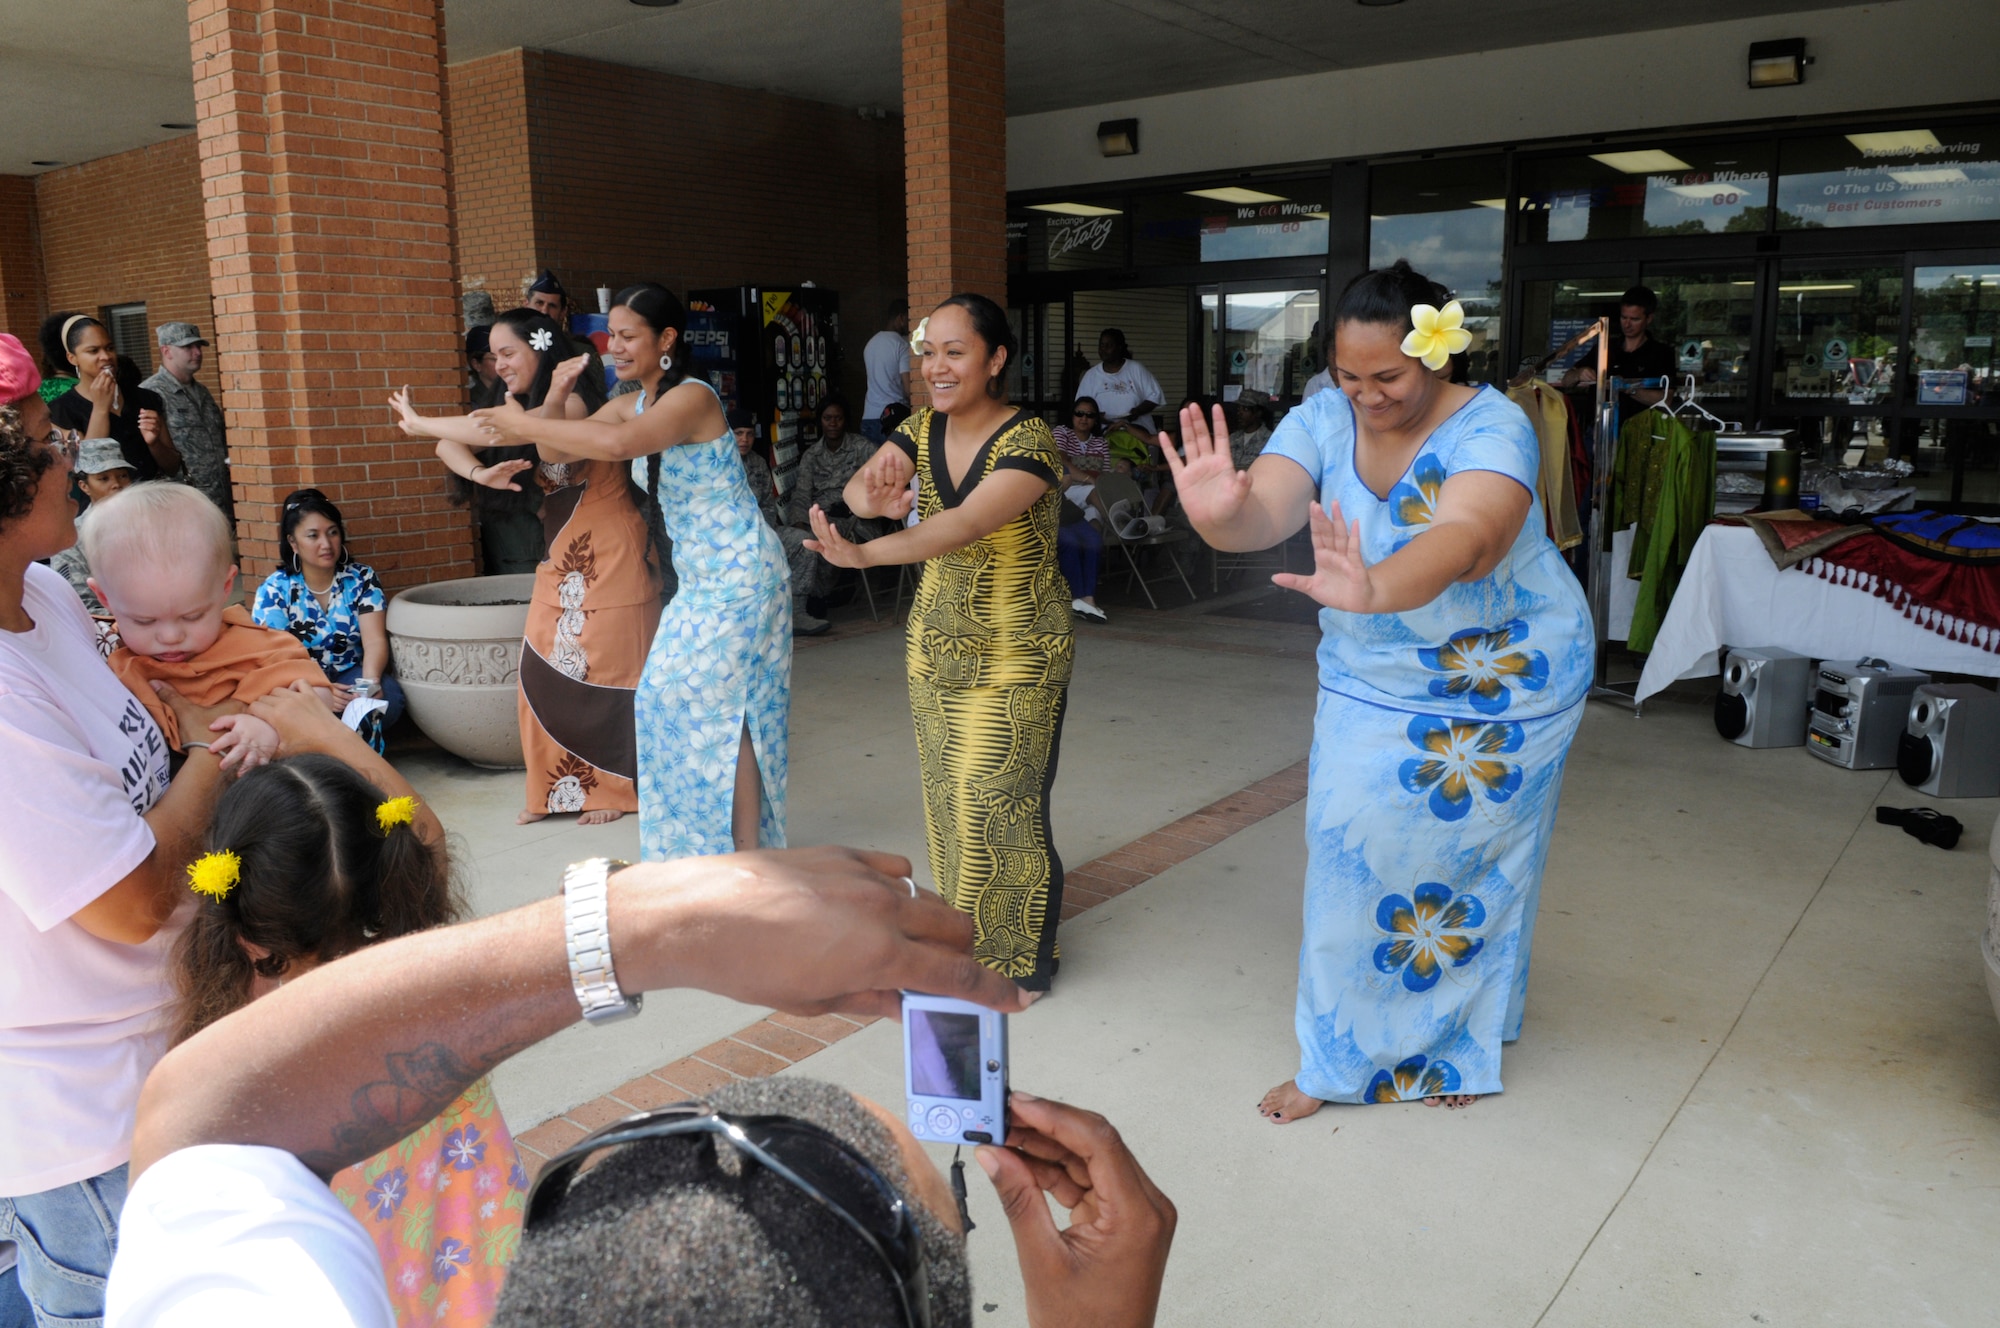 1st Lt. Jennifer Fillmore, SrA Maryann Goings, SrA Chrissina Tavake and Maryell Tyrell perform a Samoan Polynesian Dance in traditional costumes. U. S. Air Force photo by Sue Sapp